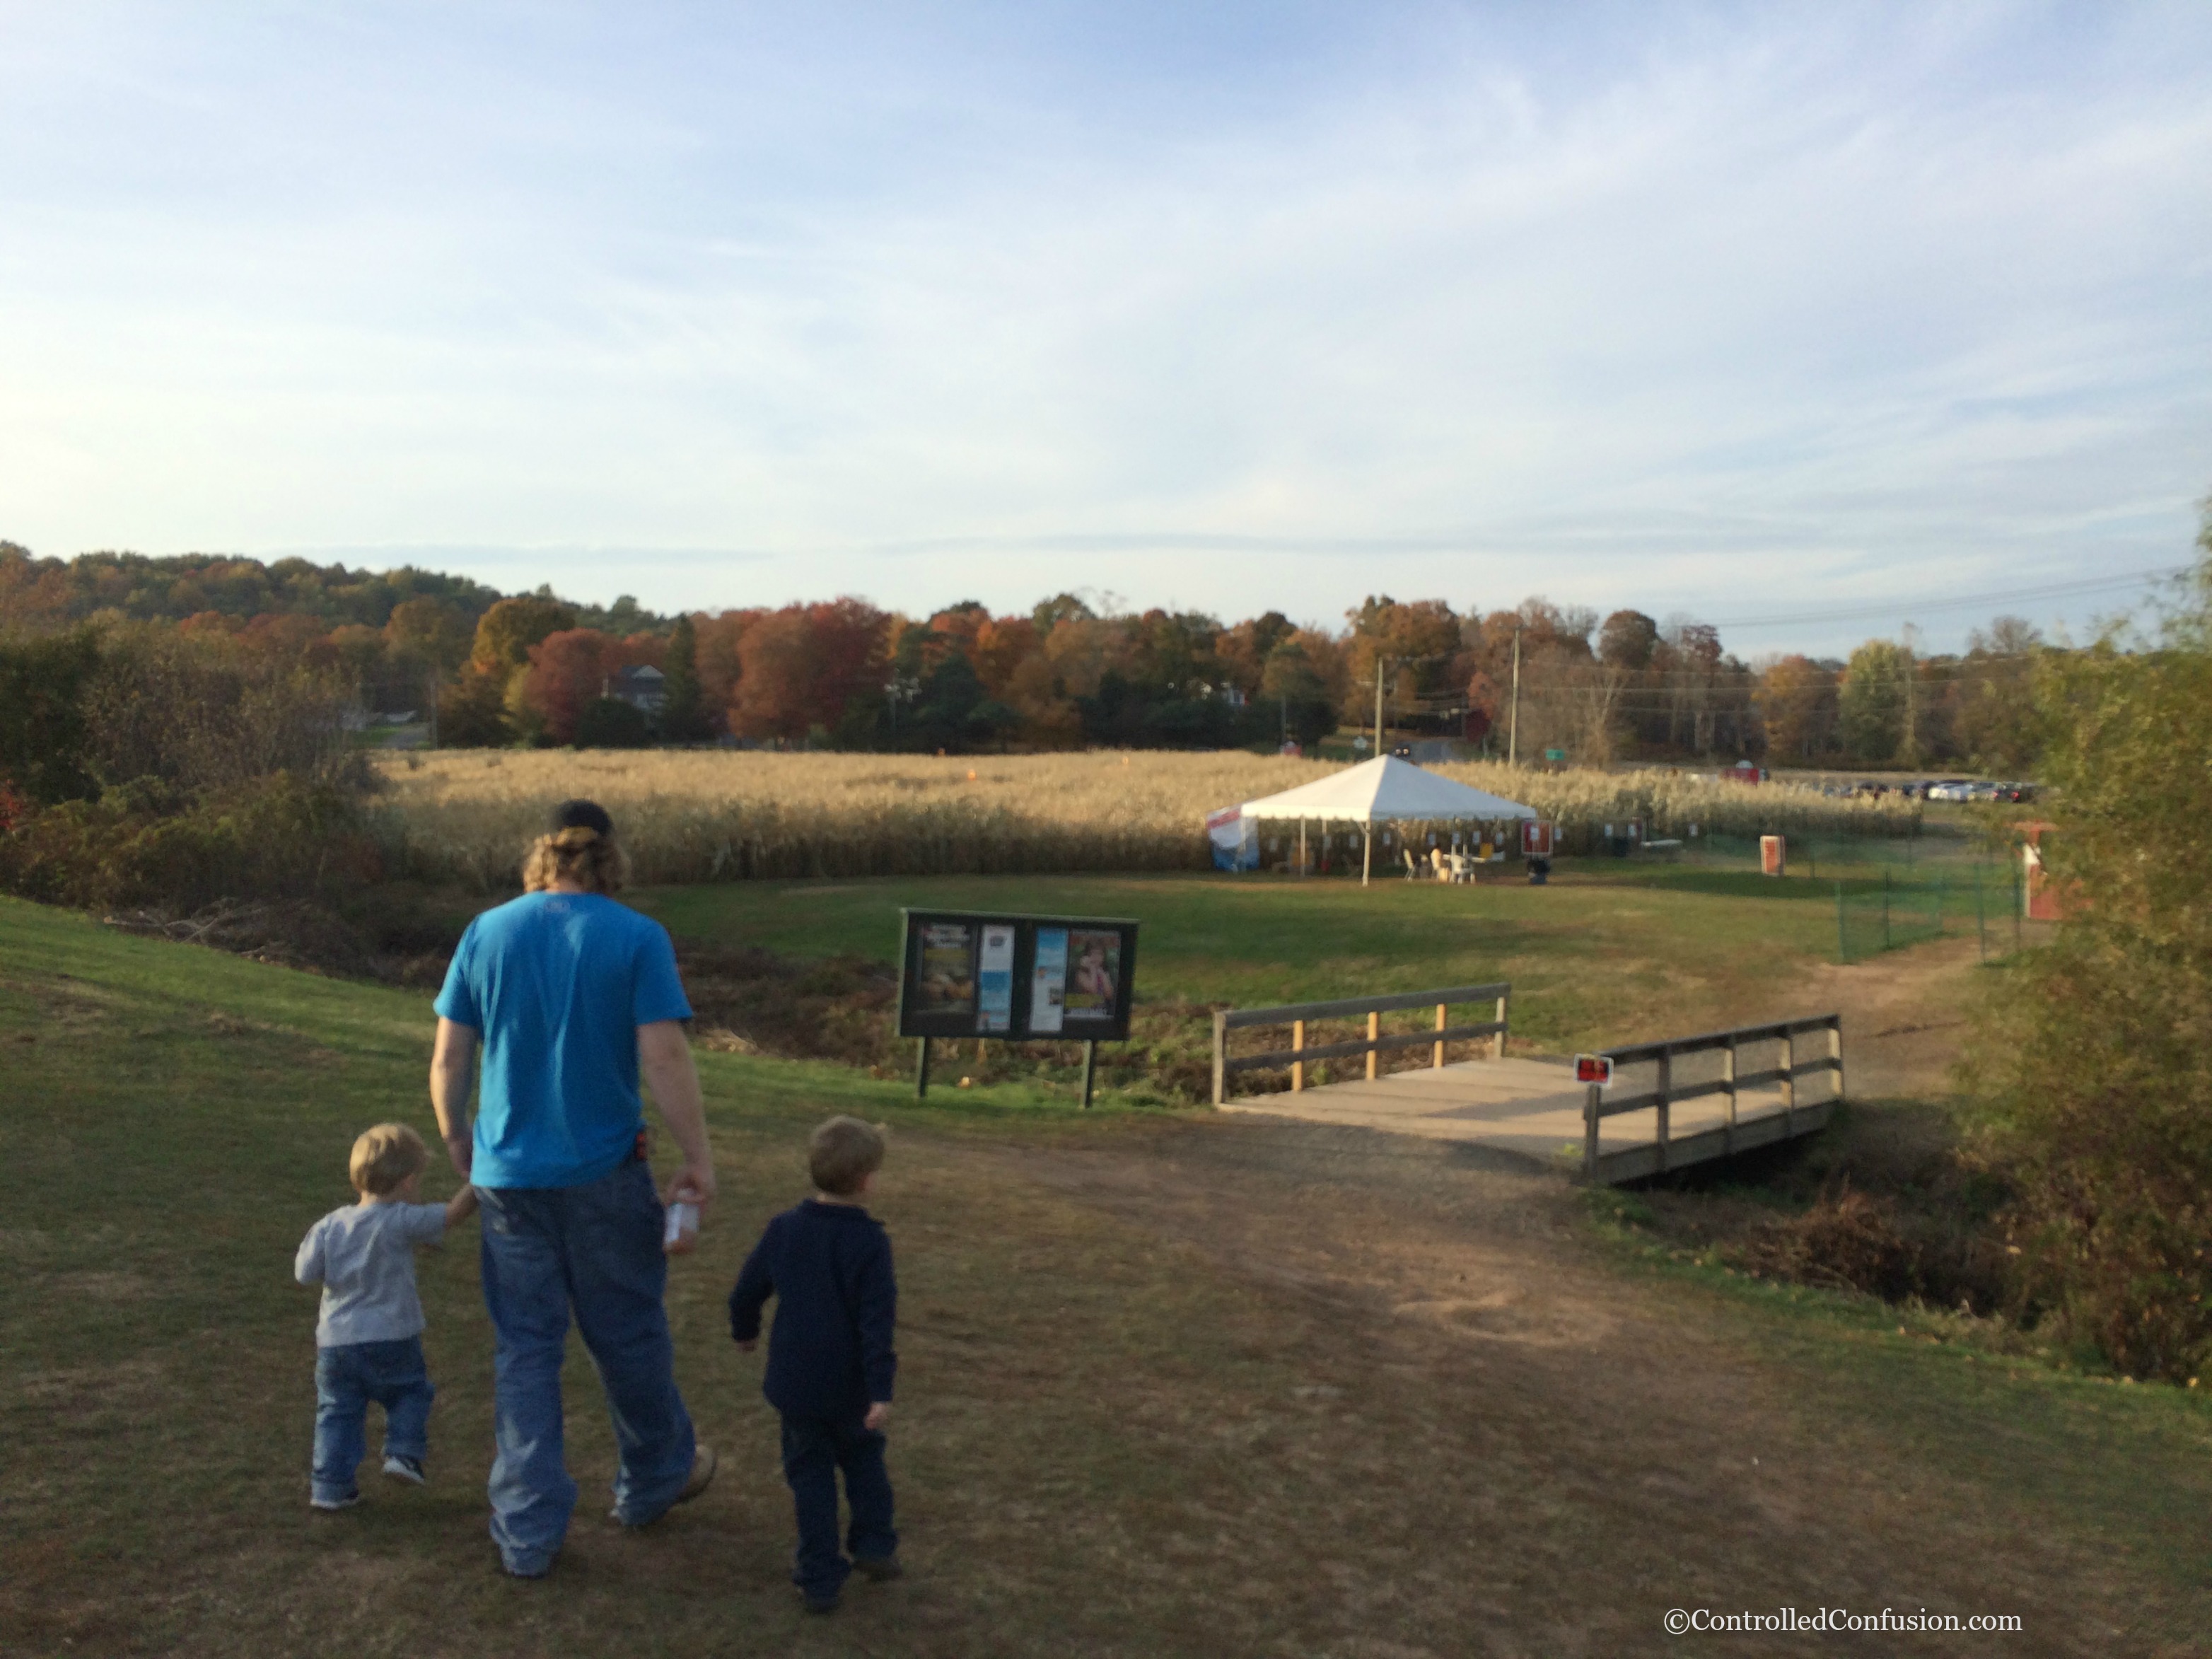 Family Fun At Lyman's Orchard for Our #LexusHarvest #FallFun31